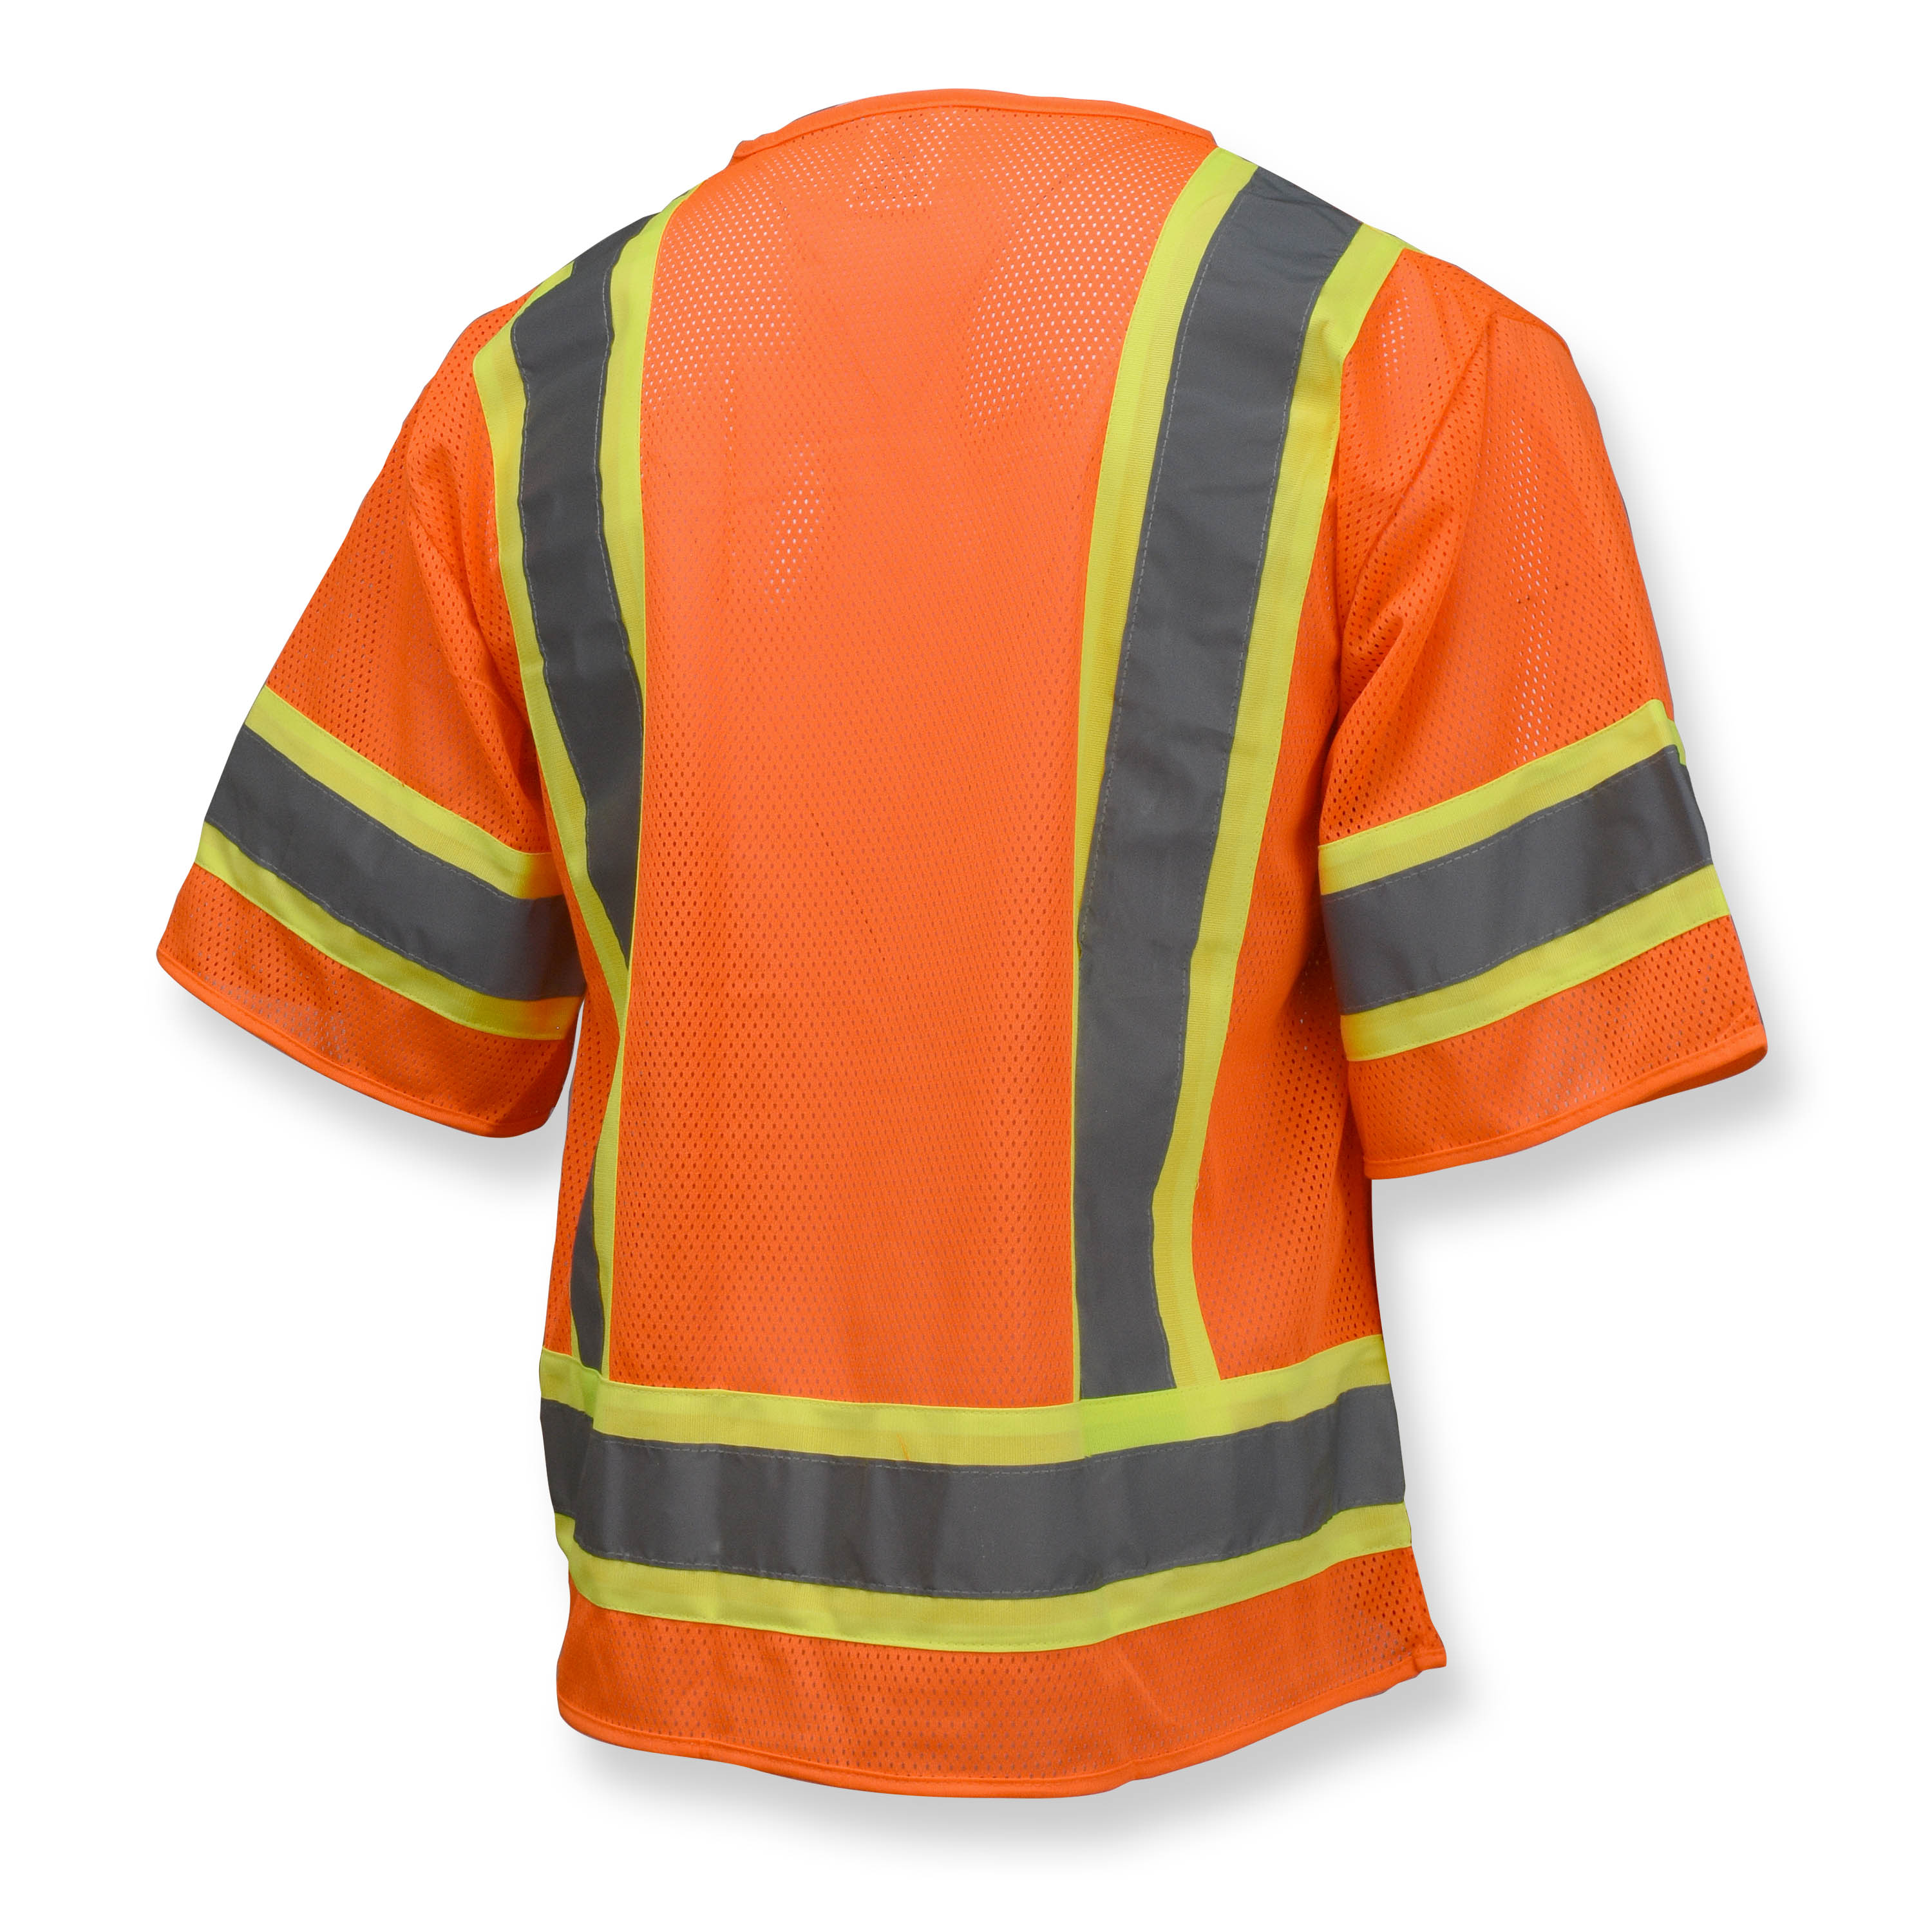 Picture of Radians SV22-3 Economy Type R Class 3 Mesh Safety Vest with Two-Tone Trim